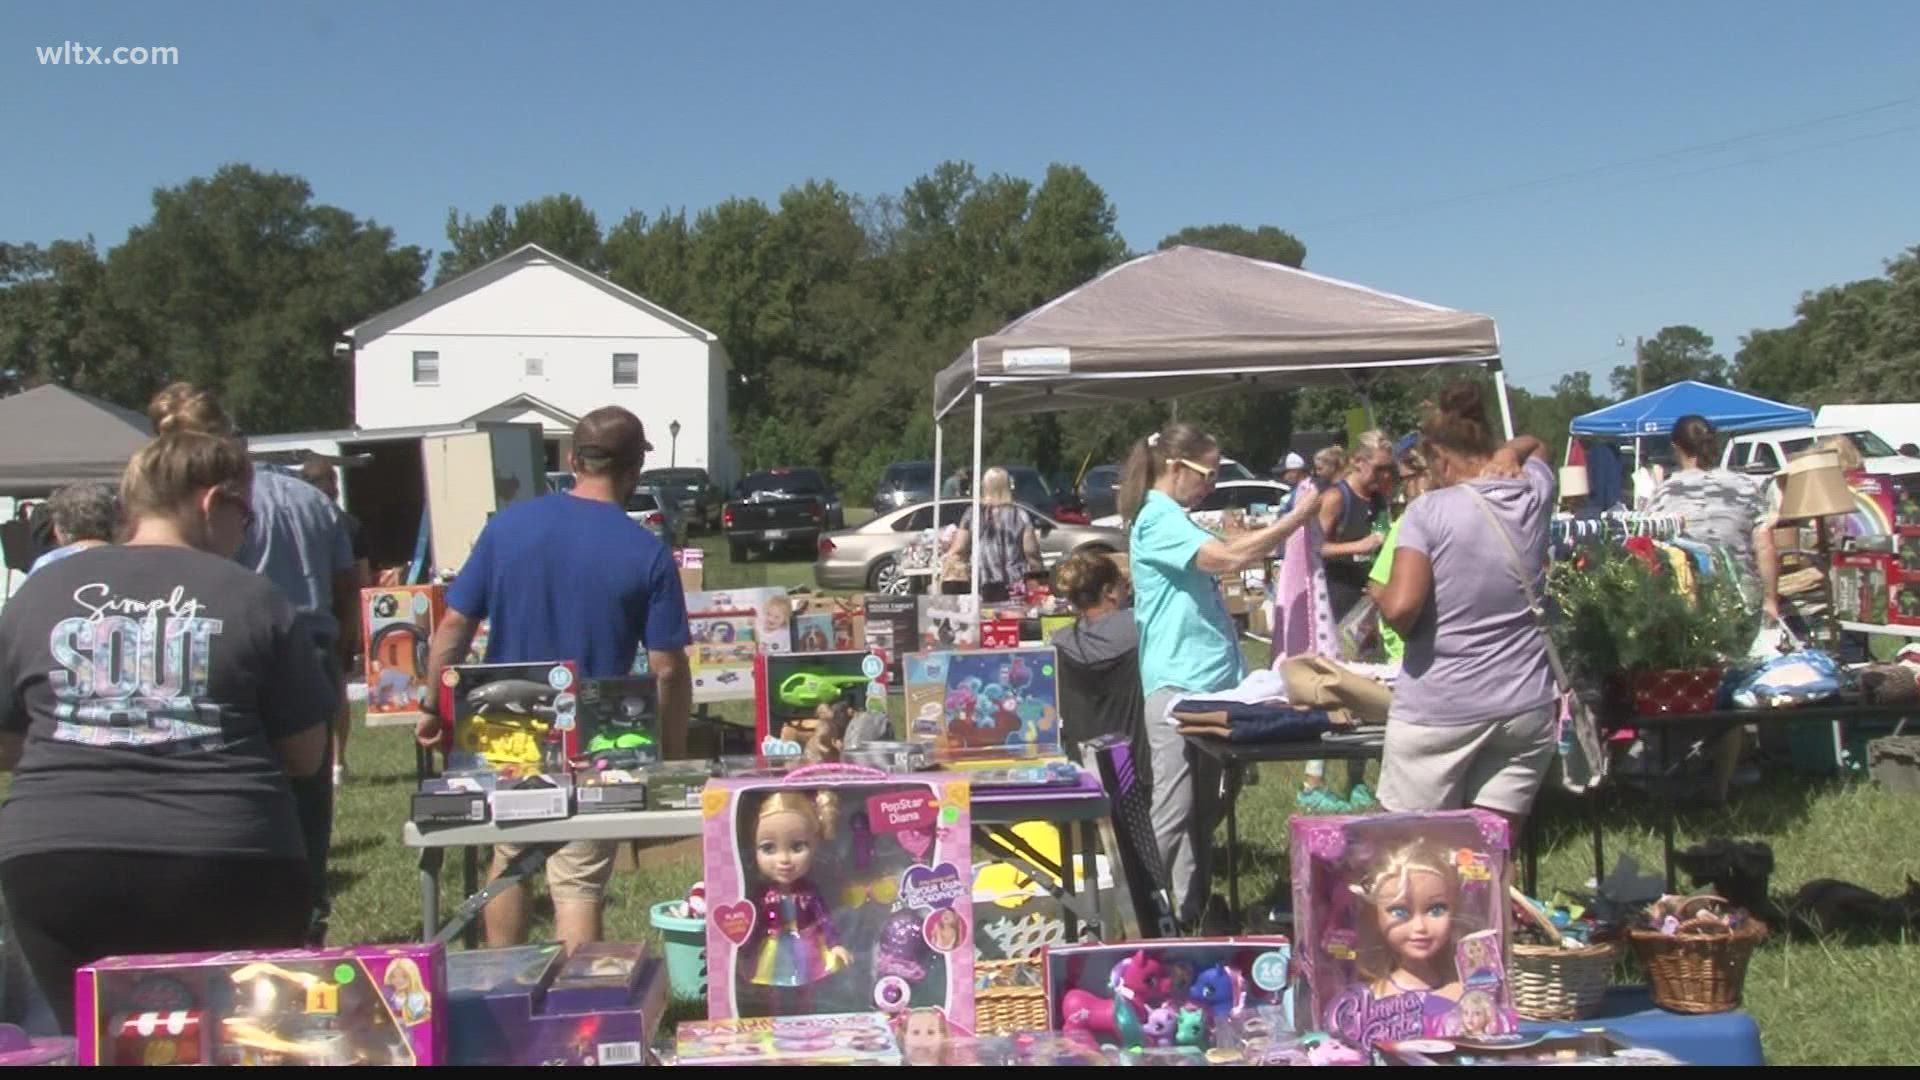 Big Grab Mile Yard Sale Brings Thousands To Fairfield County Wltx